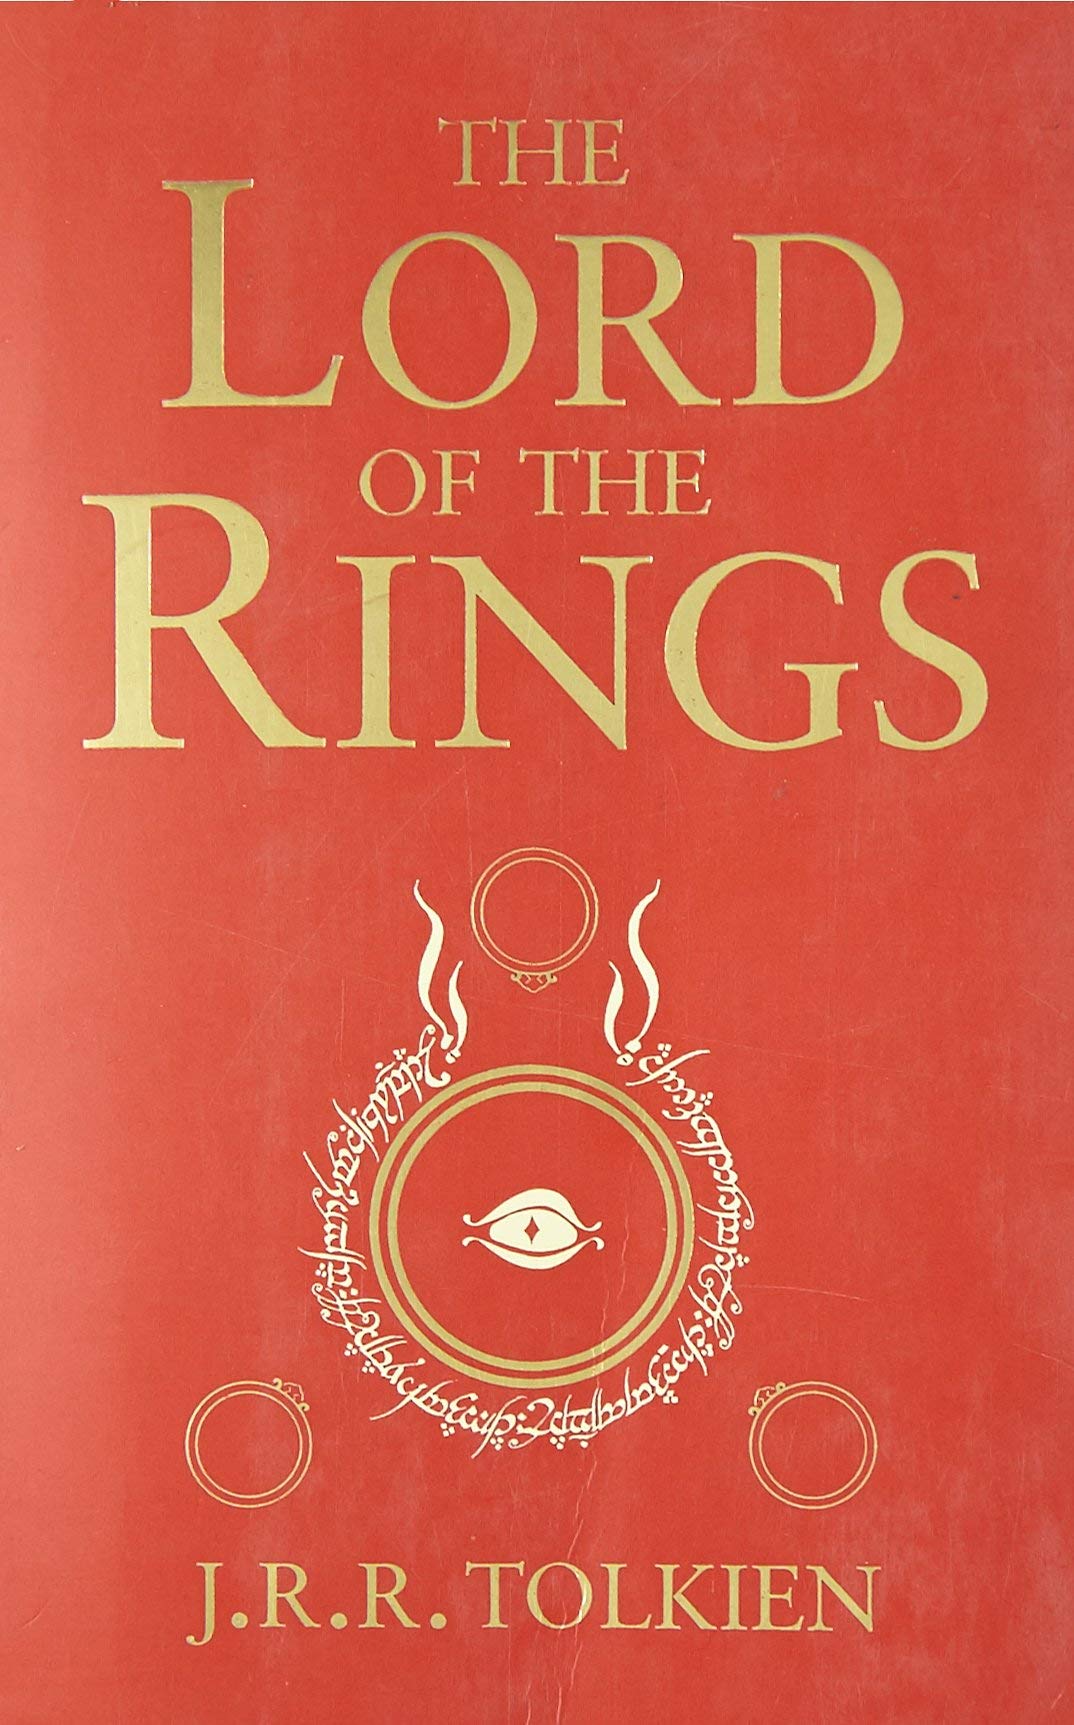 The Lord of the Rings, by J.R.R. Tolkien